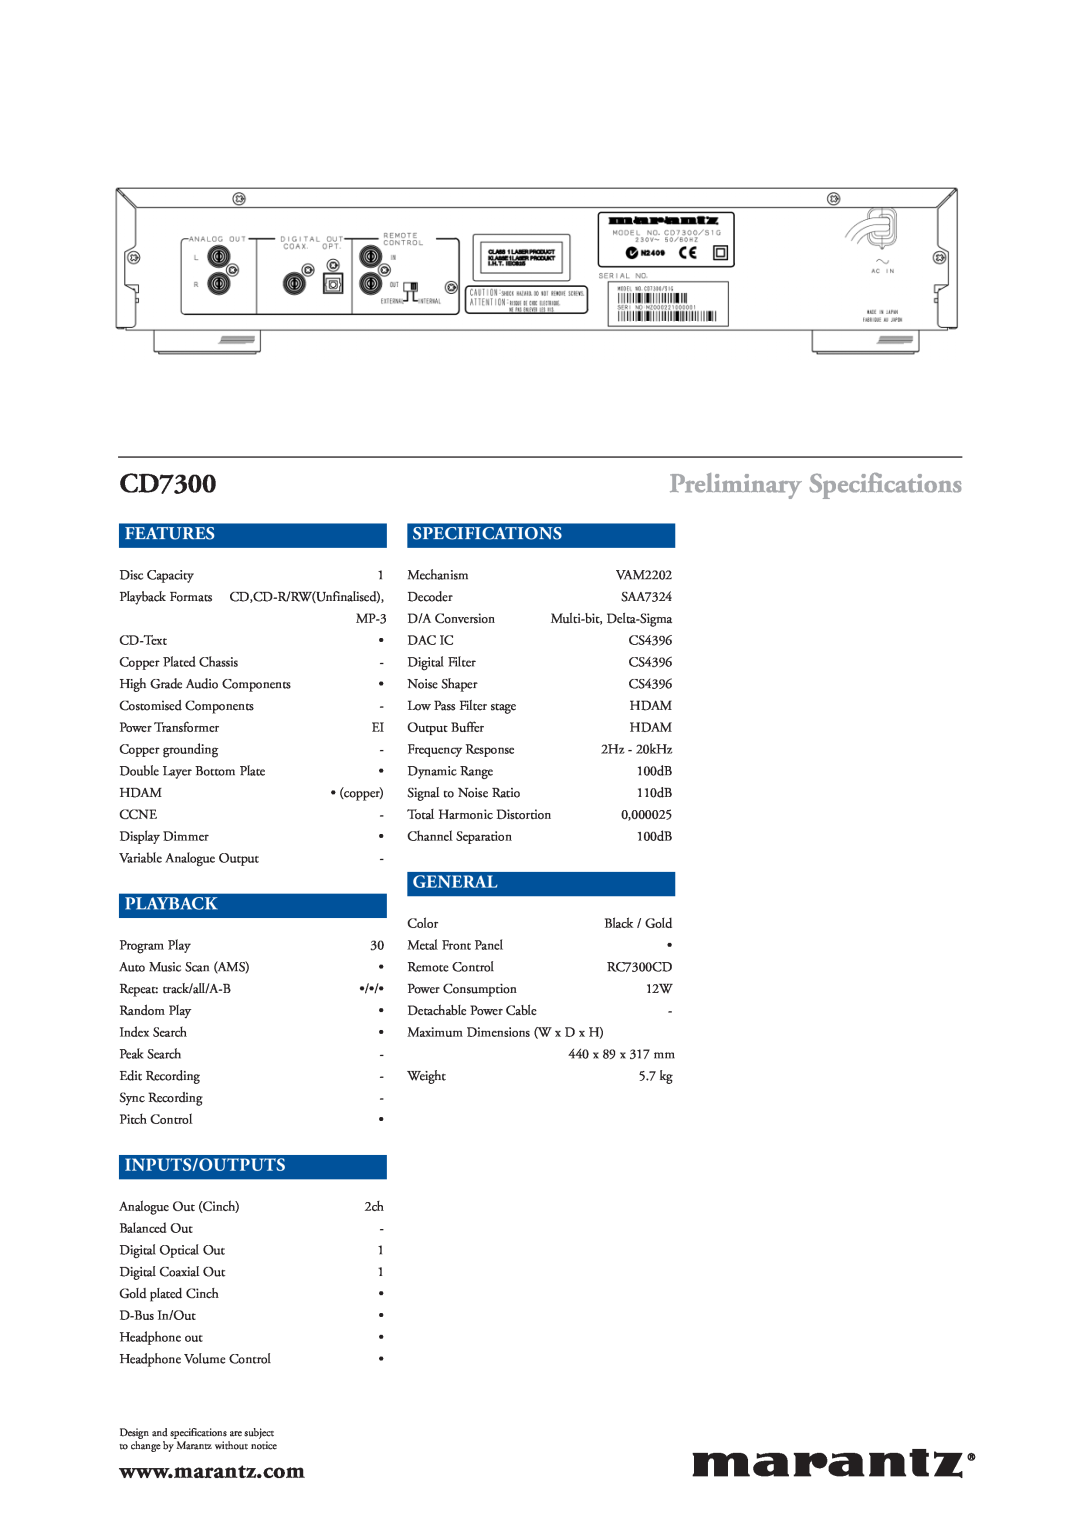 Marantz CD7300 manual Preliminary Specifications, Features, General, Playback, Inputs/Outputs 